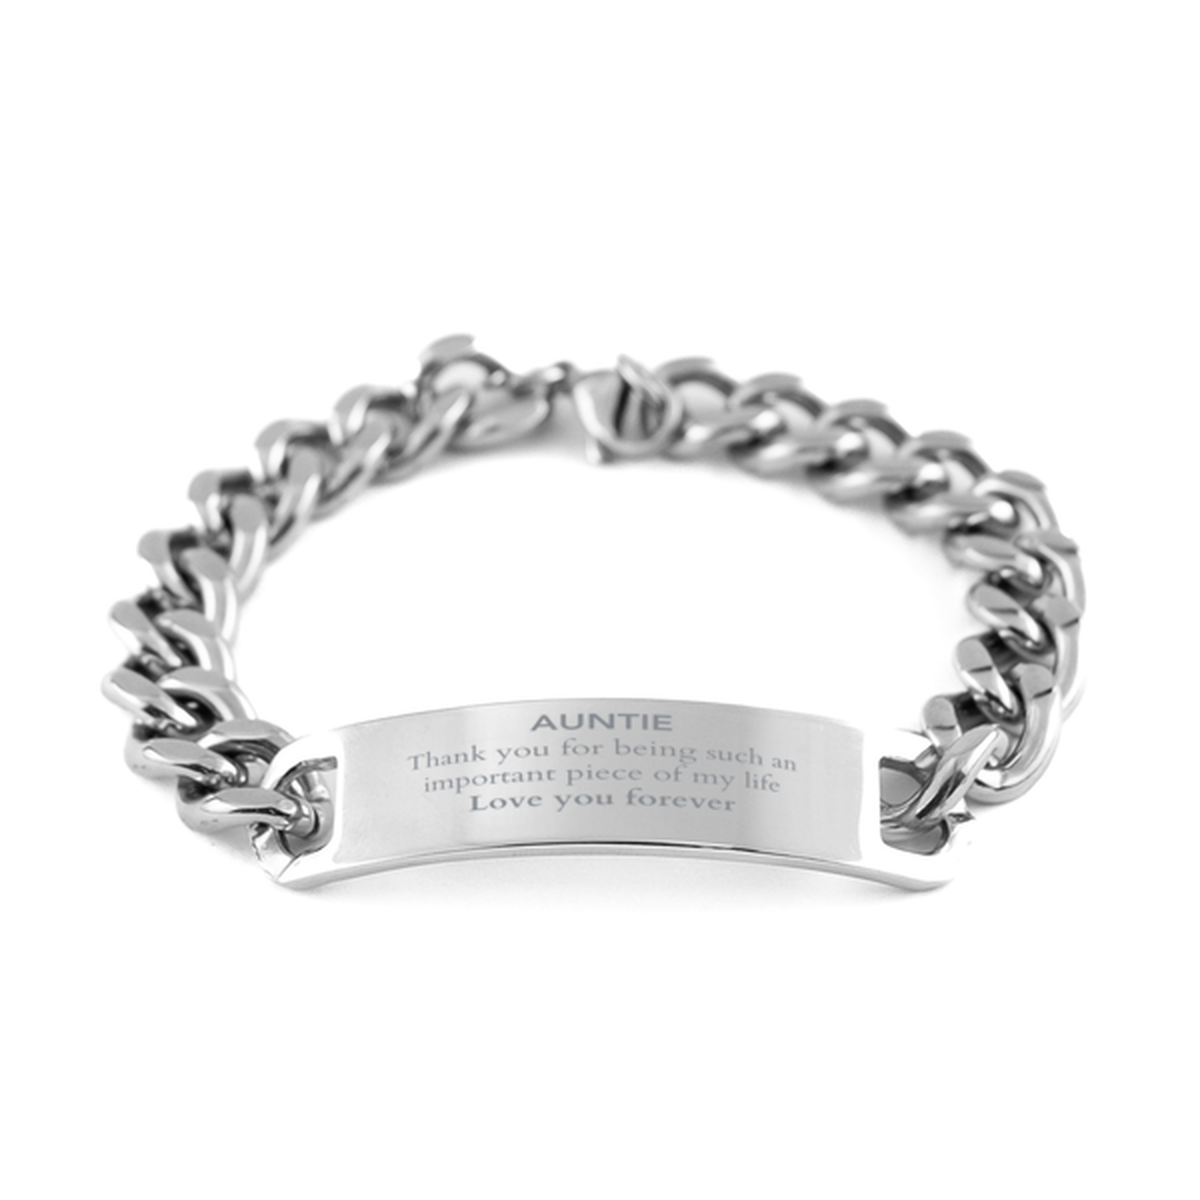 Appropriate Auntie Cuban Chain Stainless Steel Bracelet Epic Birthday Gifts for Auntie Thank you for being such an important piece of my life Auntie Christmas Mothers Fathers Day